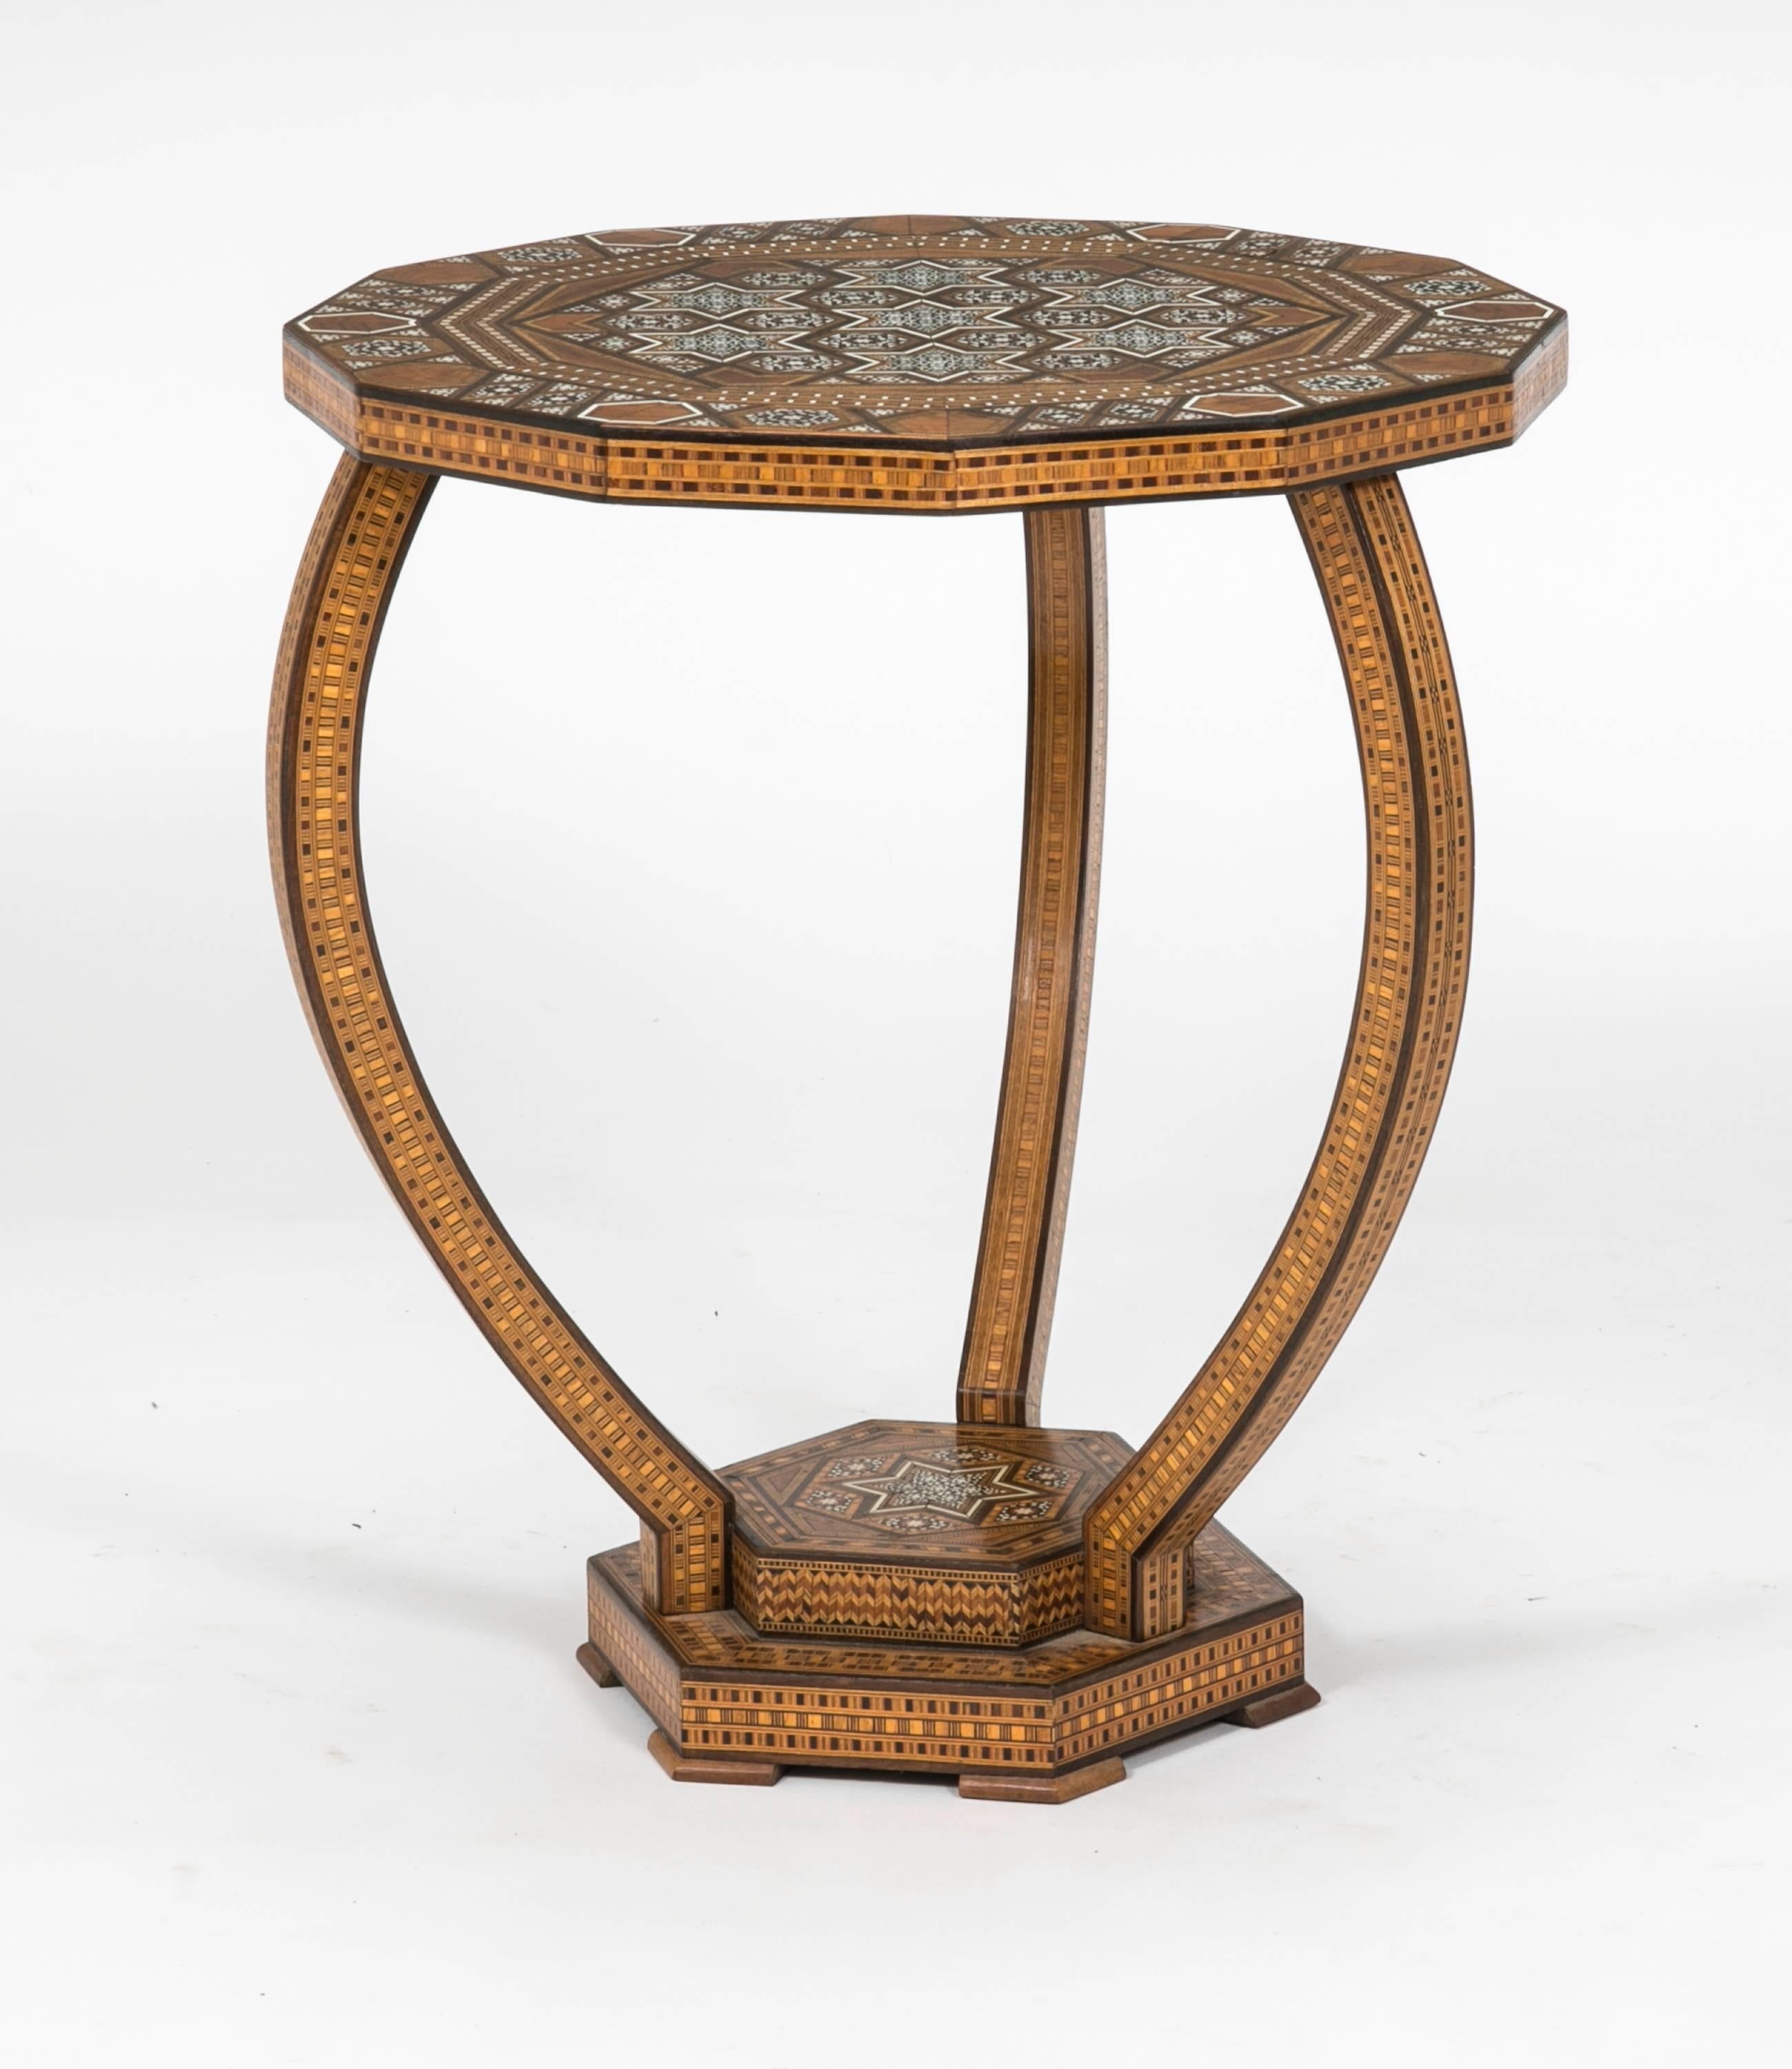 From 1940s, beautifully made with intricate detailed inlay in mother-of-pearl and bone design. Great accent side table.